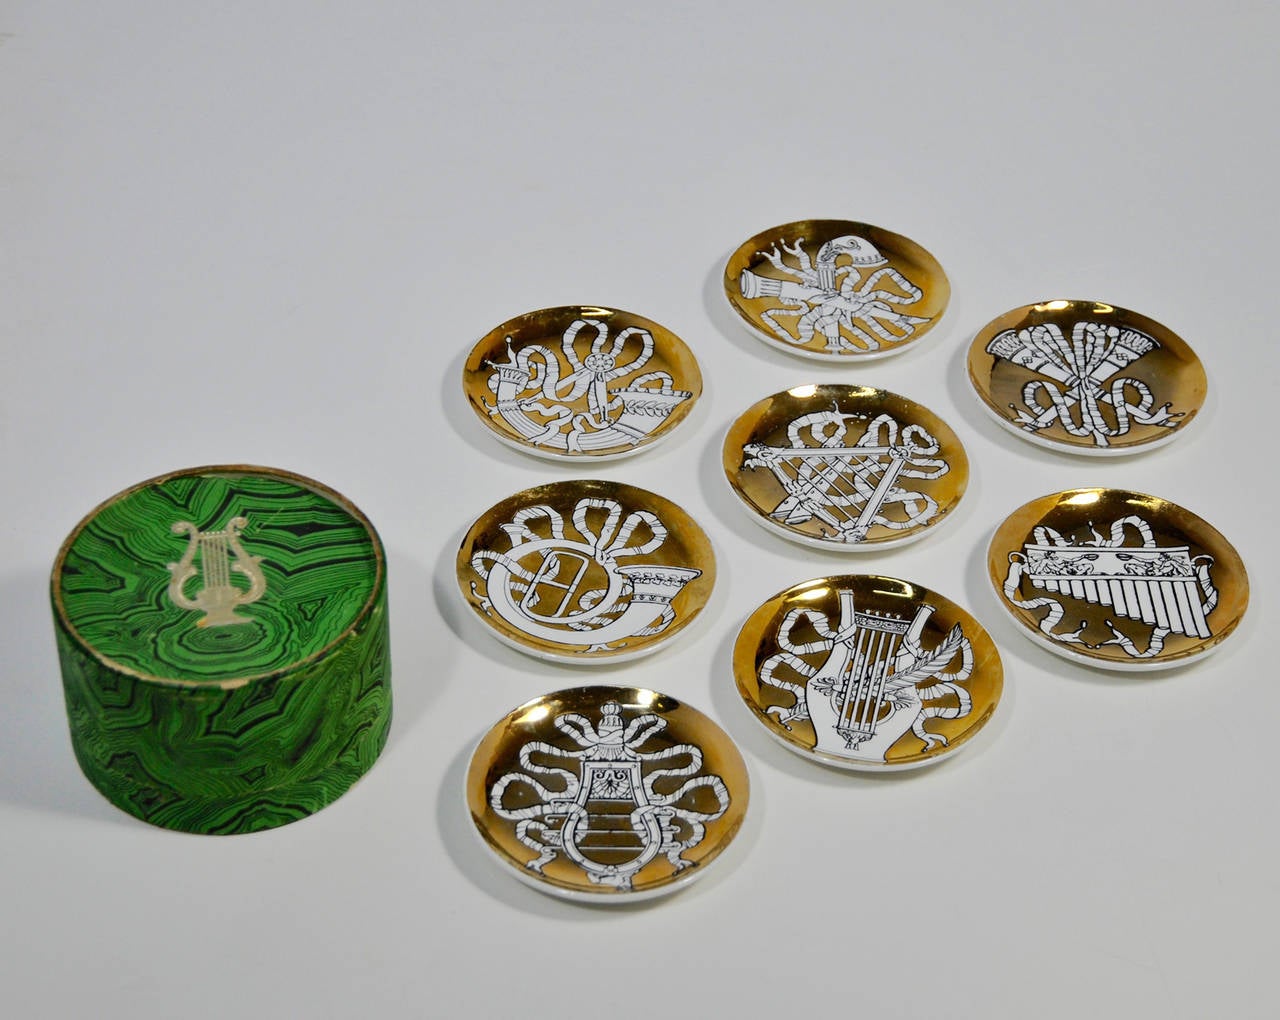 Charming set of Musicalia plates, all different design with this rich gold color.
They are vintage and were made for Bonwit Teller. They have their own box; albeit a bit worn with the Fornasetti hand on the bottom. They have the famous Fornasetti